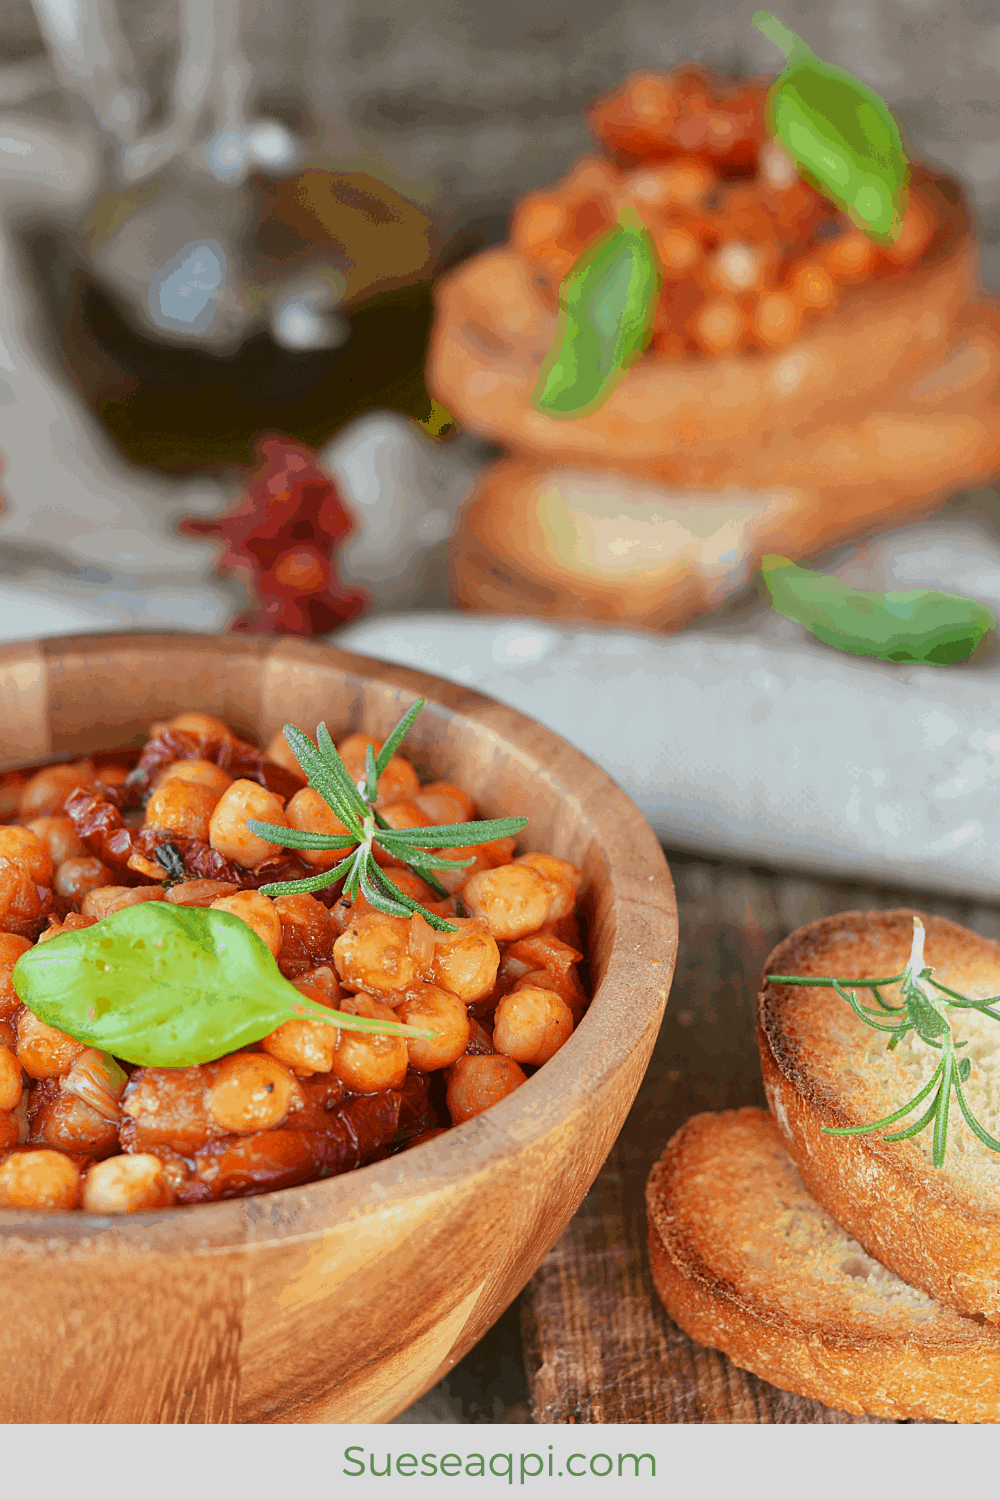 Chickpea stew in a wooden bowl basil and rosemary garnish and 2 slices of toasted Italian bread on the side